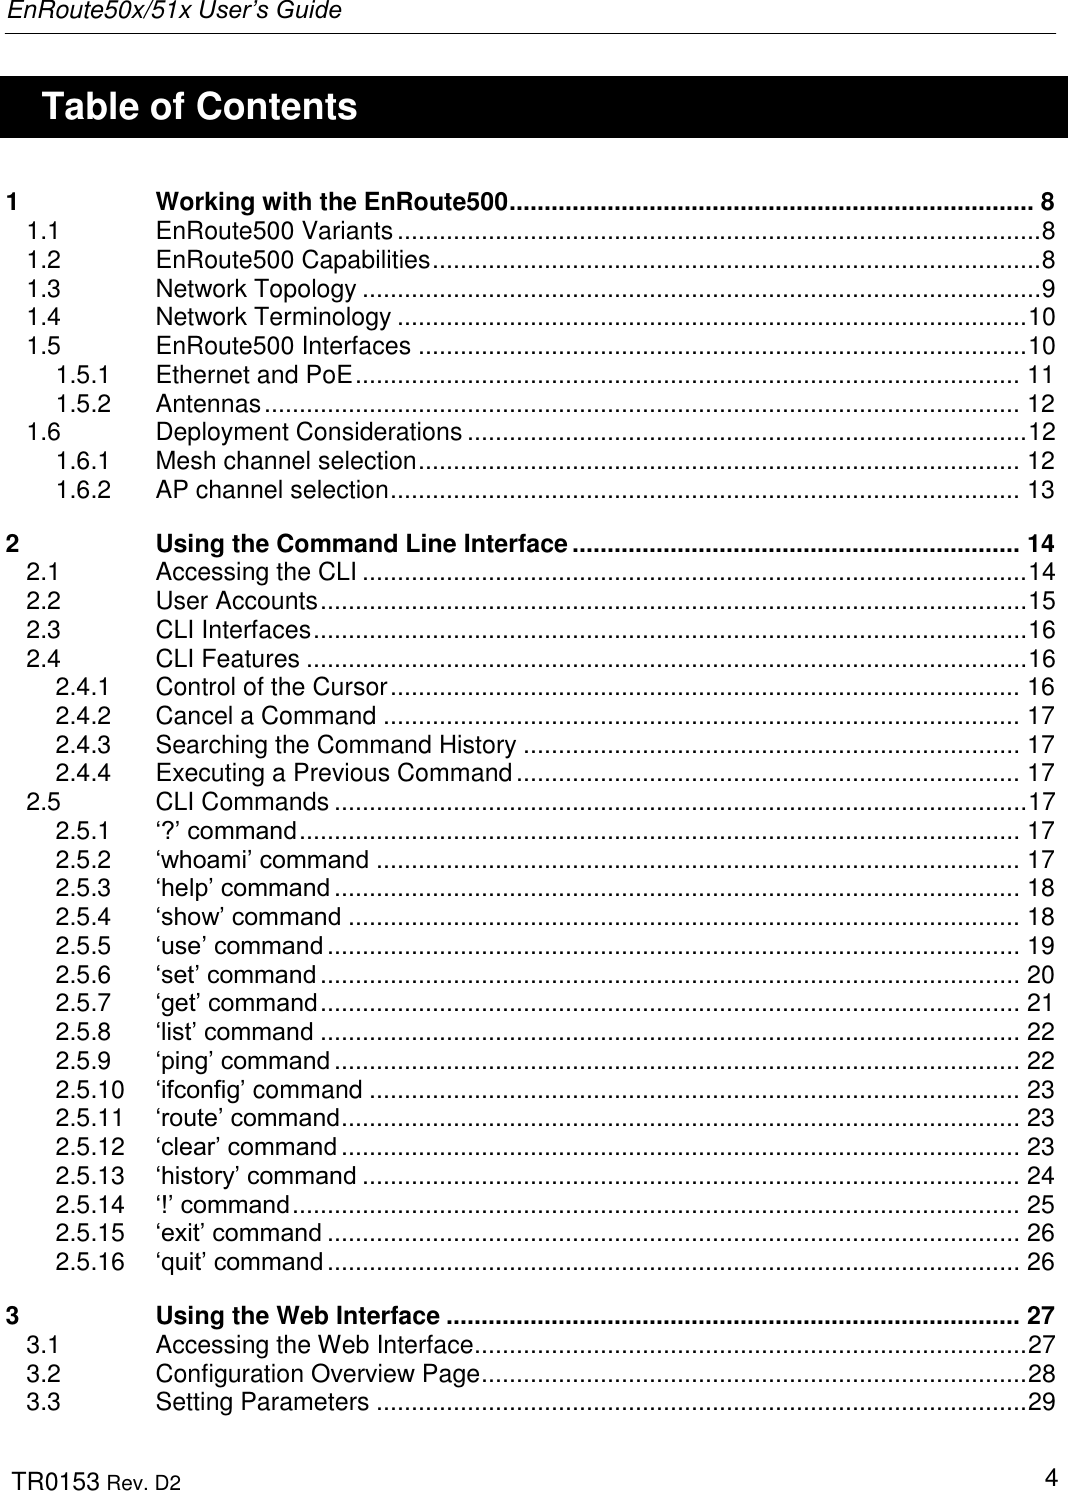 EnRoute50x/51x User’s Guide  TR0153 Rev. D2   4    Table of Contents 1 Working with the EnRoute500 ........................................................................... 8 1.1 EnRoute500 Variants ............................................................................................ 8 1.2 EnRoute500 Capabilities ....................................................................................... 8 1.3 Network Topology ................................................................................................. 9 1.4 Network Terminology .......................................................................................... 10 1.5 EnRoute500 Interfaces ....................................................................................... 10 1.5.1 Ethernet and PoE ............................................................................................... 11 1.5.2 Antennas ............................................................................................................ 12 1.6 Deployment Considerations ................................................................................ 12 1.6.1 Mesh channel selection ...................................................................................... 12 1.6.2 AP channel selection .......................................................................................... 13 2 Using the Command Line Interface ................................................................ 14 2.1 Accessing the CLI ............................................................................................... 14 2.2 User Accounts ..................................................................................................... 15 2.3 CLI Interfaces ...................................................................................................... 16 2.4 CLI Features ....................................................................................................... 16 2.4.1 Control of the Cursor .......................................................................................... 16 2.4.2 Cancel a Command ........................................................................................... 17 2.4.3 Searching the Command History ....................................................................... 17 2.4.4 Executing a Previous Command ........................................................................ 17 2.5 CLI Commands ................................................................................................... 17 2.5.1 „?‟ command ....................................................................................................... 17 2.5.2 „whoami‟ command ............................................................................................ 17 2.5.3 „help‟ command .................................................................................................. 18 2.5.4 „show‟ command ................................................................................................ 18 2.5.5 „use‟ command ................................................................................................... 19 2.5.6 „set‟ command .................................................................................................... 20 2.5.7 „get‟ command .................................................................................................... 21 2.5.8 „list‟ command .................................................................................................... 22 2.5.9 „ping‟ command .................................................................................................. 22 2.5.10 „ifconfig‟ command ............................................................................................. 23 2.5.11 „route‟ command ................................................................................................. 23 2.5.12 „clear‟ command ................................................................................................. 23 2.5.13 „history‟ command .............................................................................................. 24 2.5.14 „!‟ command ........................................................................................................ 25 2.5.15 „exit‟ command ................................................................................................... 26 2.5.16 „quit‟ command ................................................................................................... 26 3 Using the Web Interface .................................................................................. 27 3.1 Accessing the Web Interface ............................................................................... 27 3.2 Configuration Overview Page .............................................................................. 28 3.3 Setting Parameters ............................................................................................. 29 